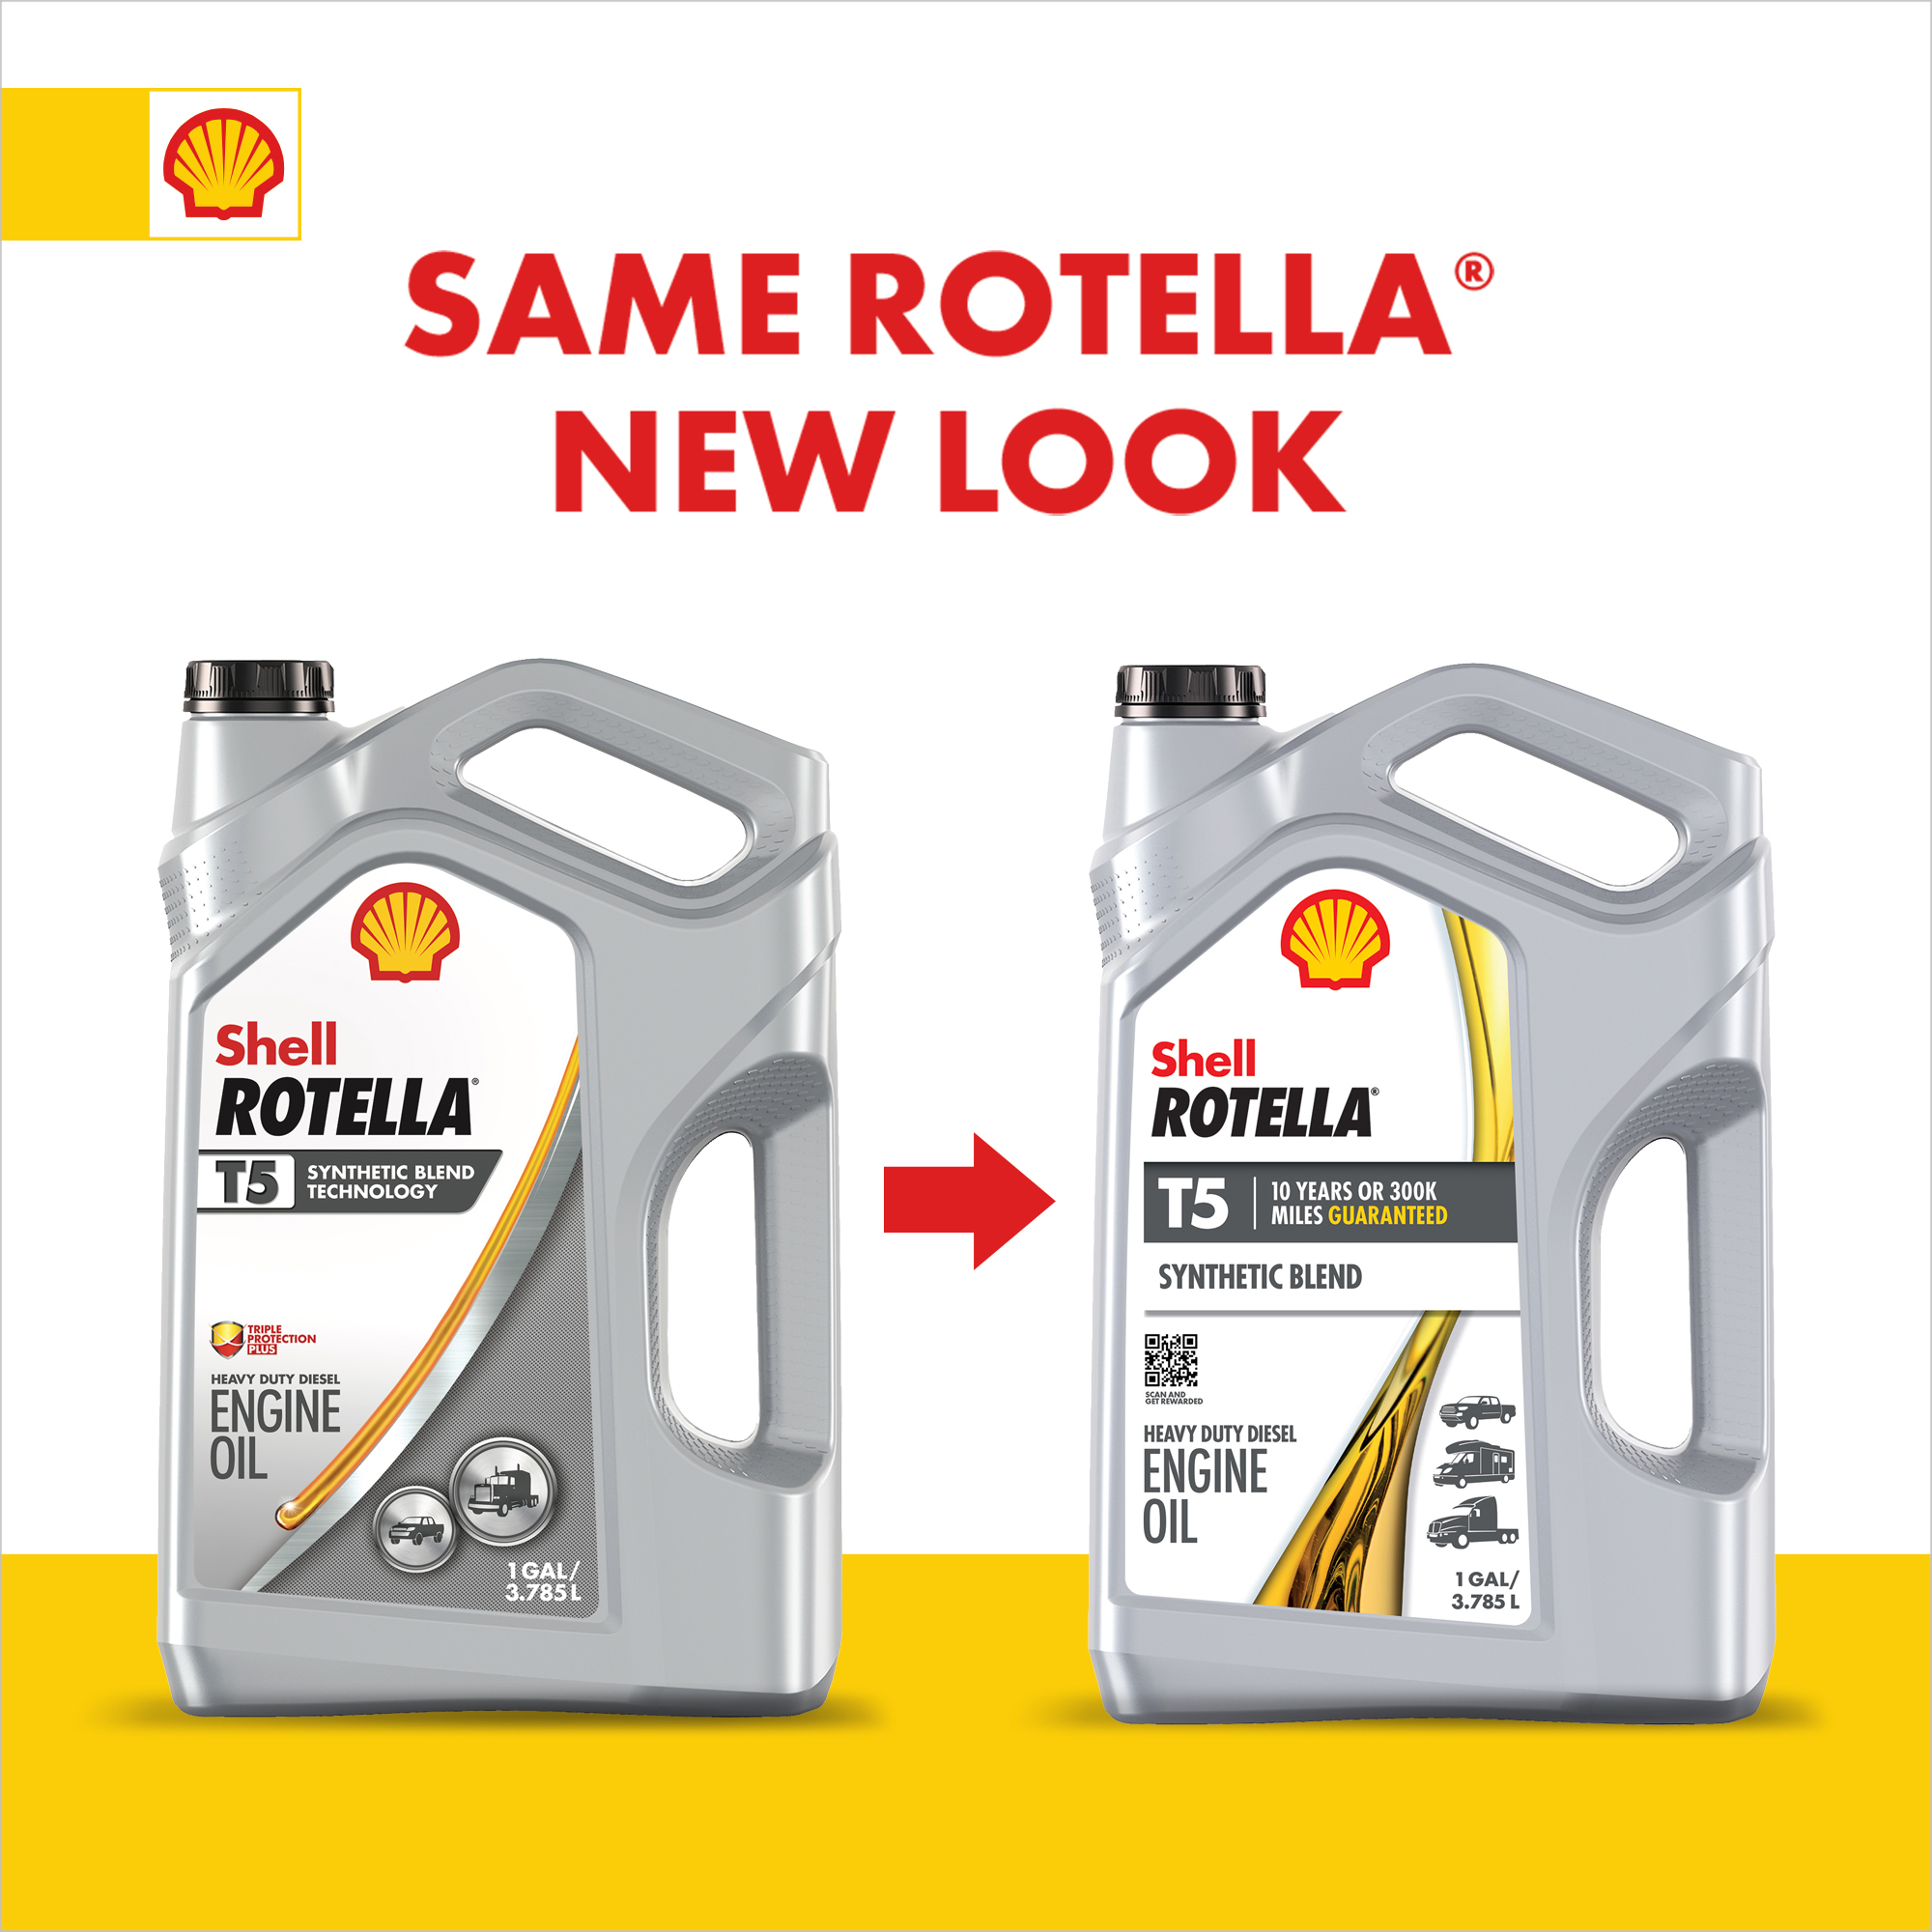 Shell Rotella T5 Synthetic Blend 15W-40 Diesel Engine Oil, 2.5 Gallon - image 4 of 9